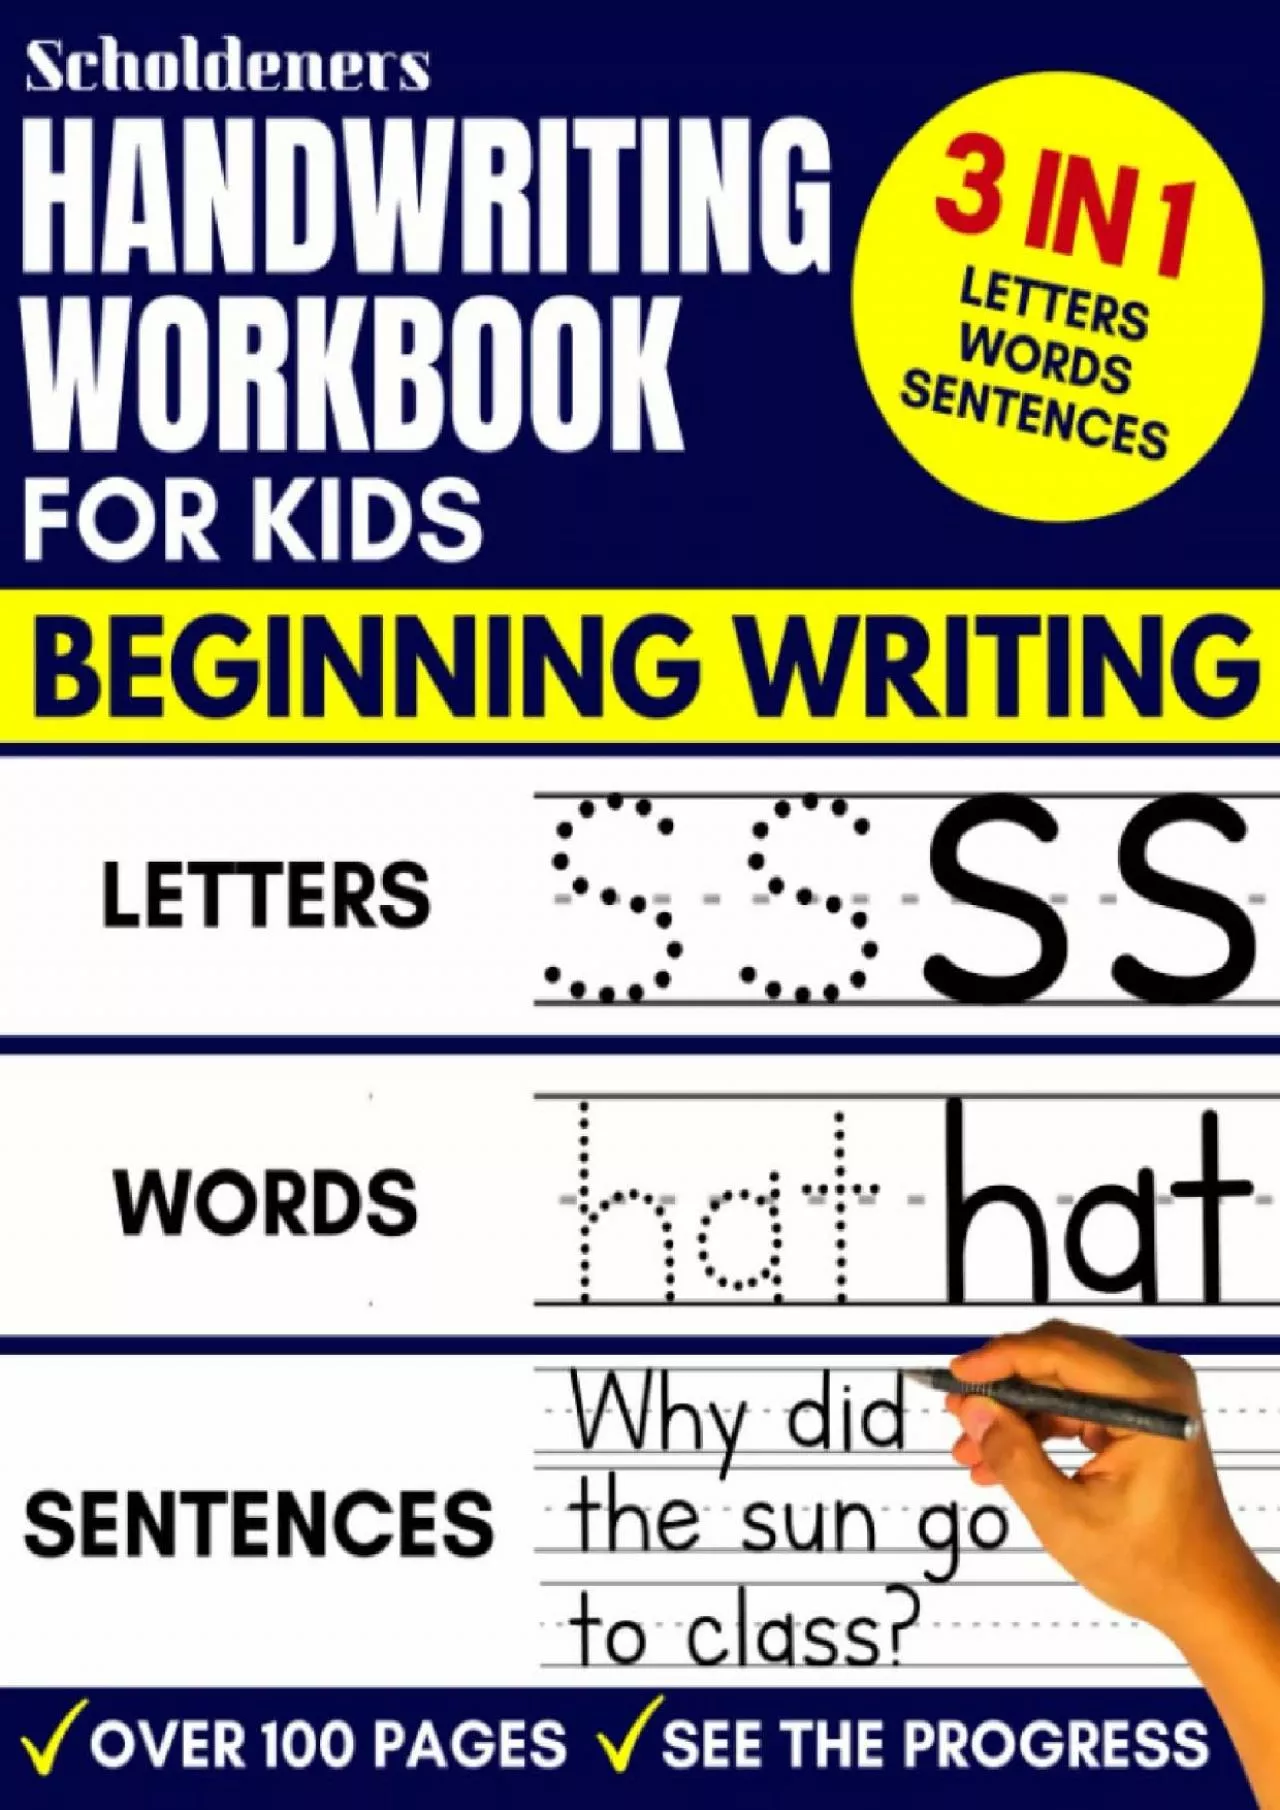 [EBOOK] Handwriting Workbook for Kids: 3-in-1 Writing Practice Book to Master Letters,